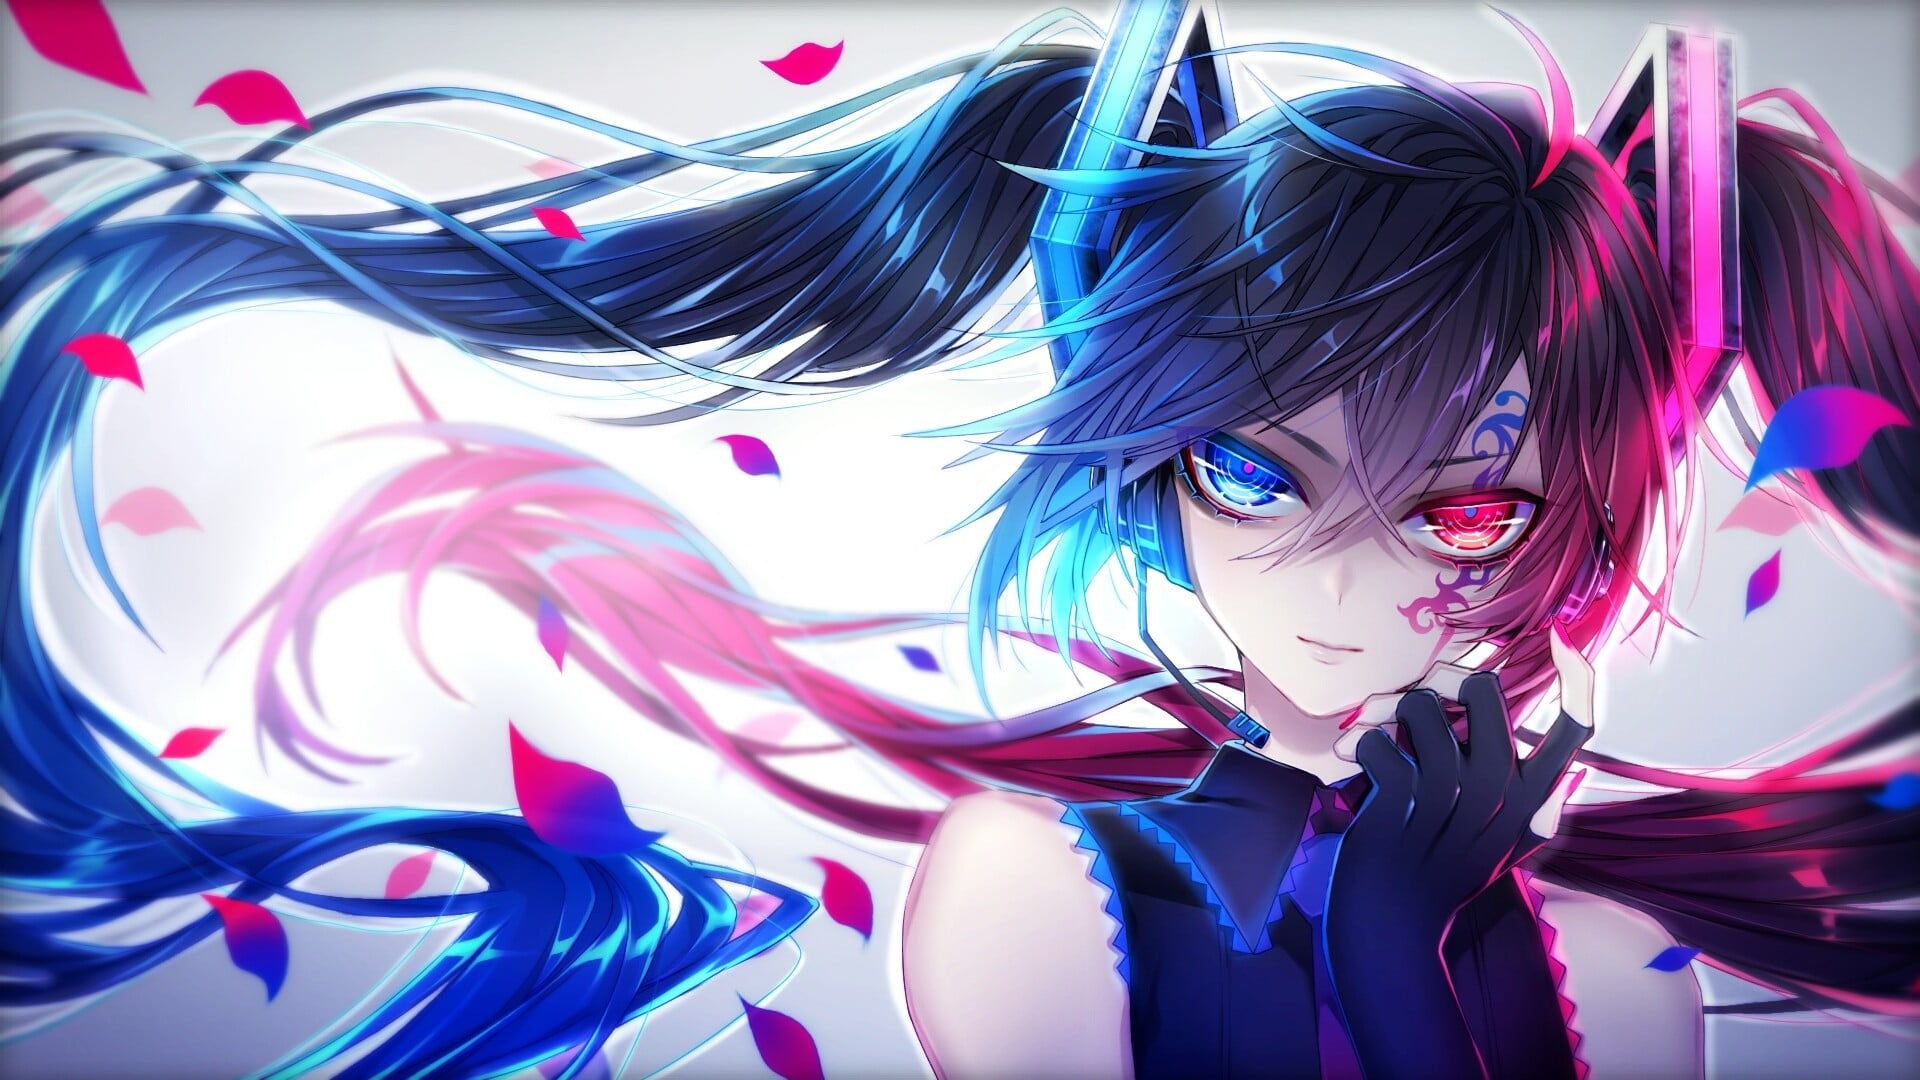 Red And Blue Anime Character Wallpapers - Wallpaper Cave